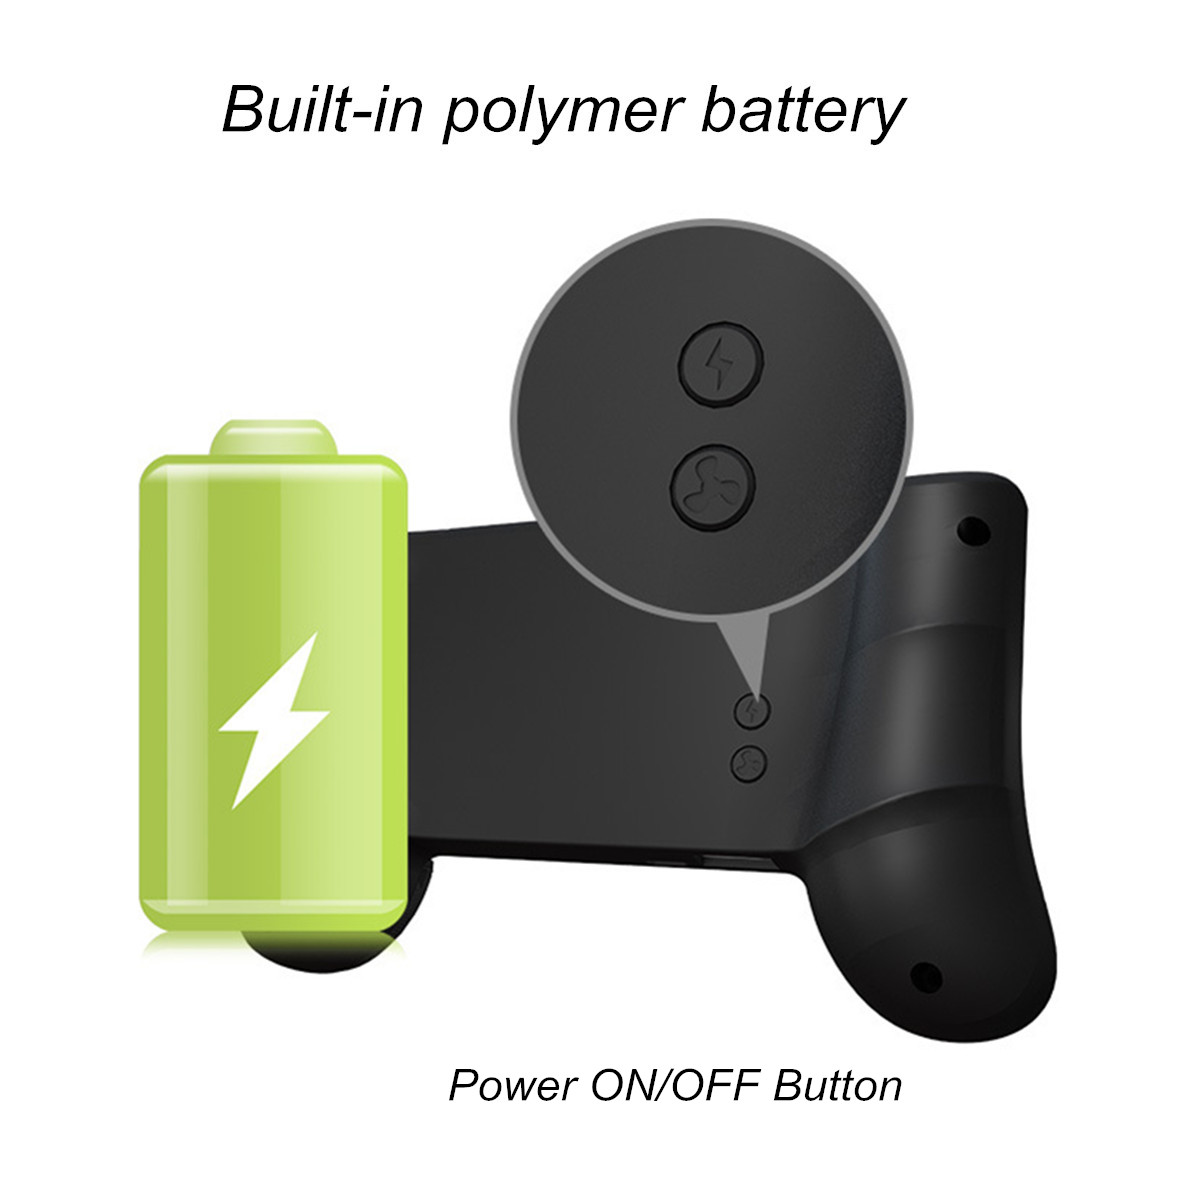 2-in-1-Touch-Screen-Mini-Cooling-Gamepad-Joystick-Power-Bank-for-IOS-Android-1420391